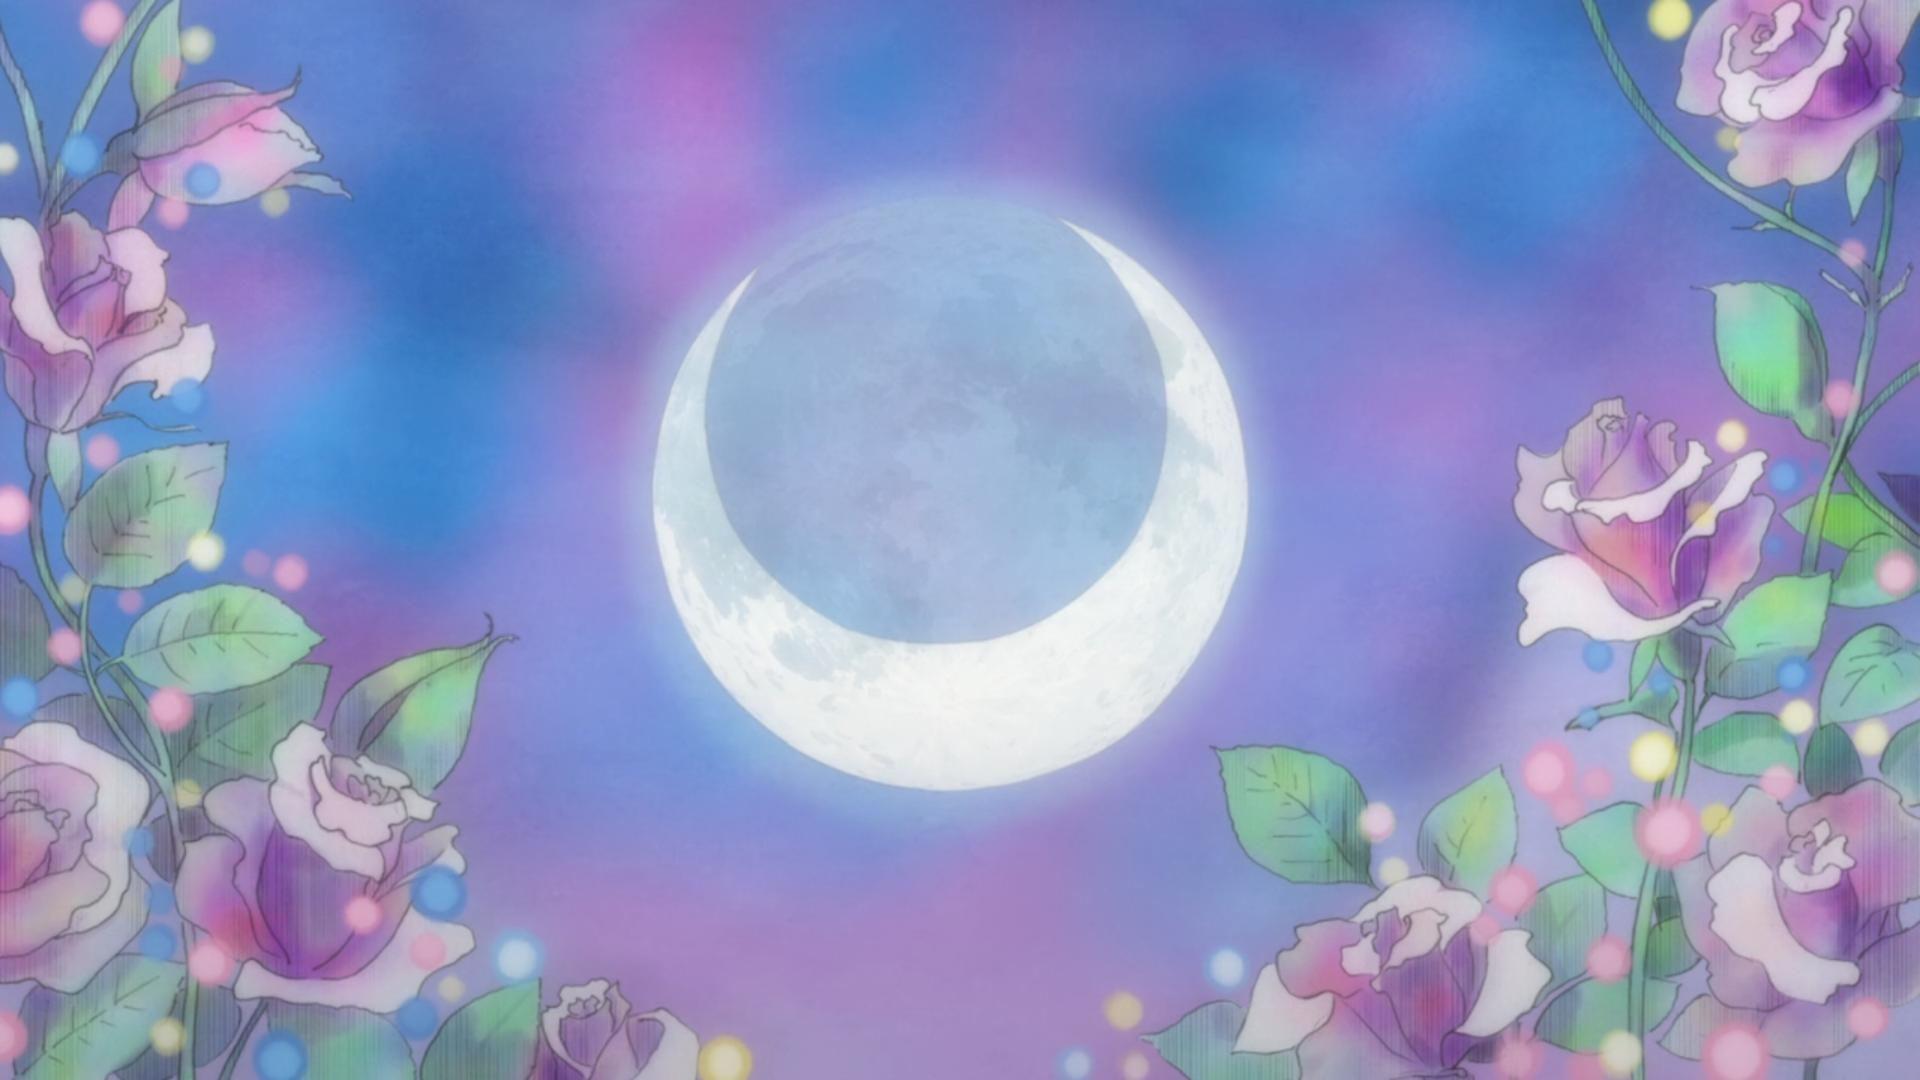 Sailor Moon Macbook Background Image and Wallpaper